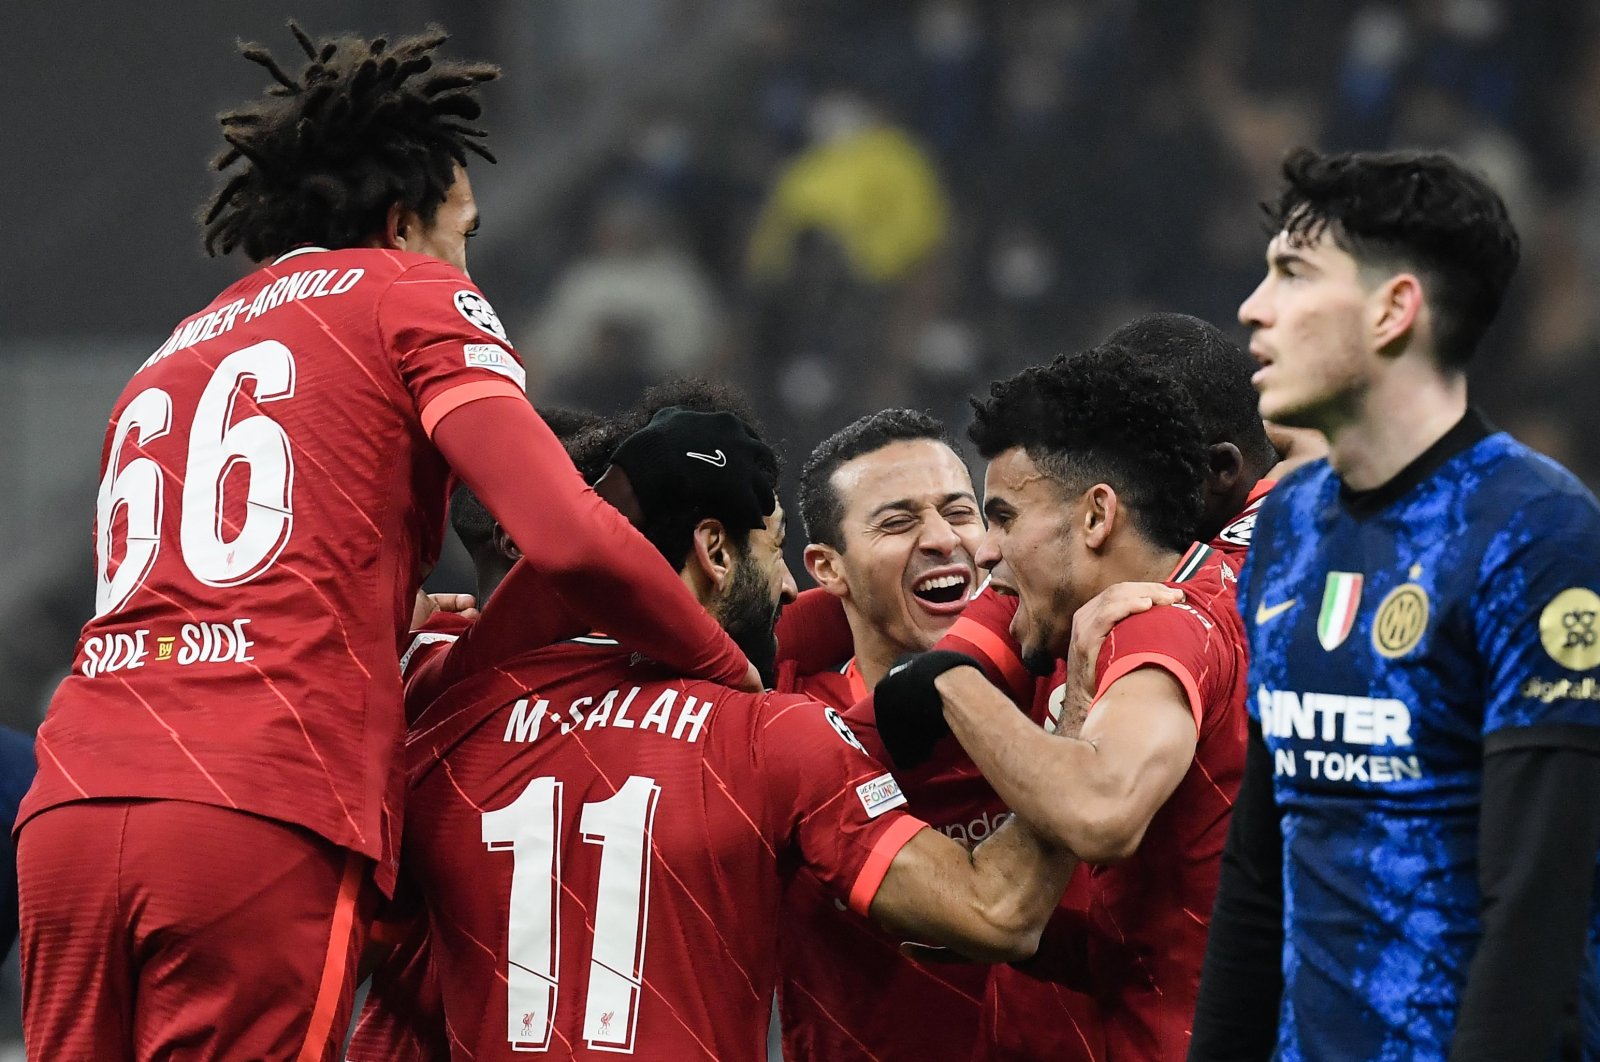 Liverpool players celebrate a goal against Inter Milan in a Champions League game, Milan, Italy, Feb. 16, 2022. (AFP Photo)